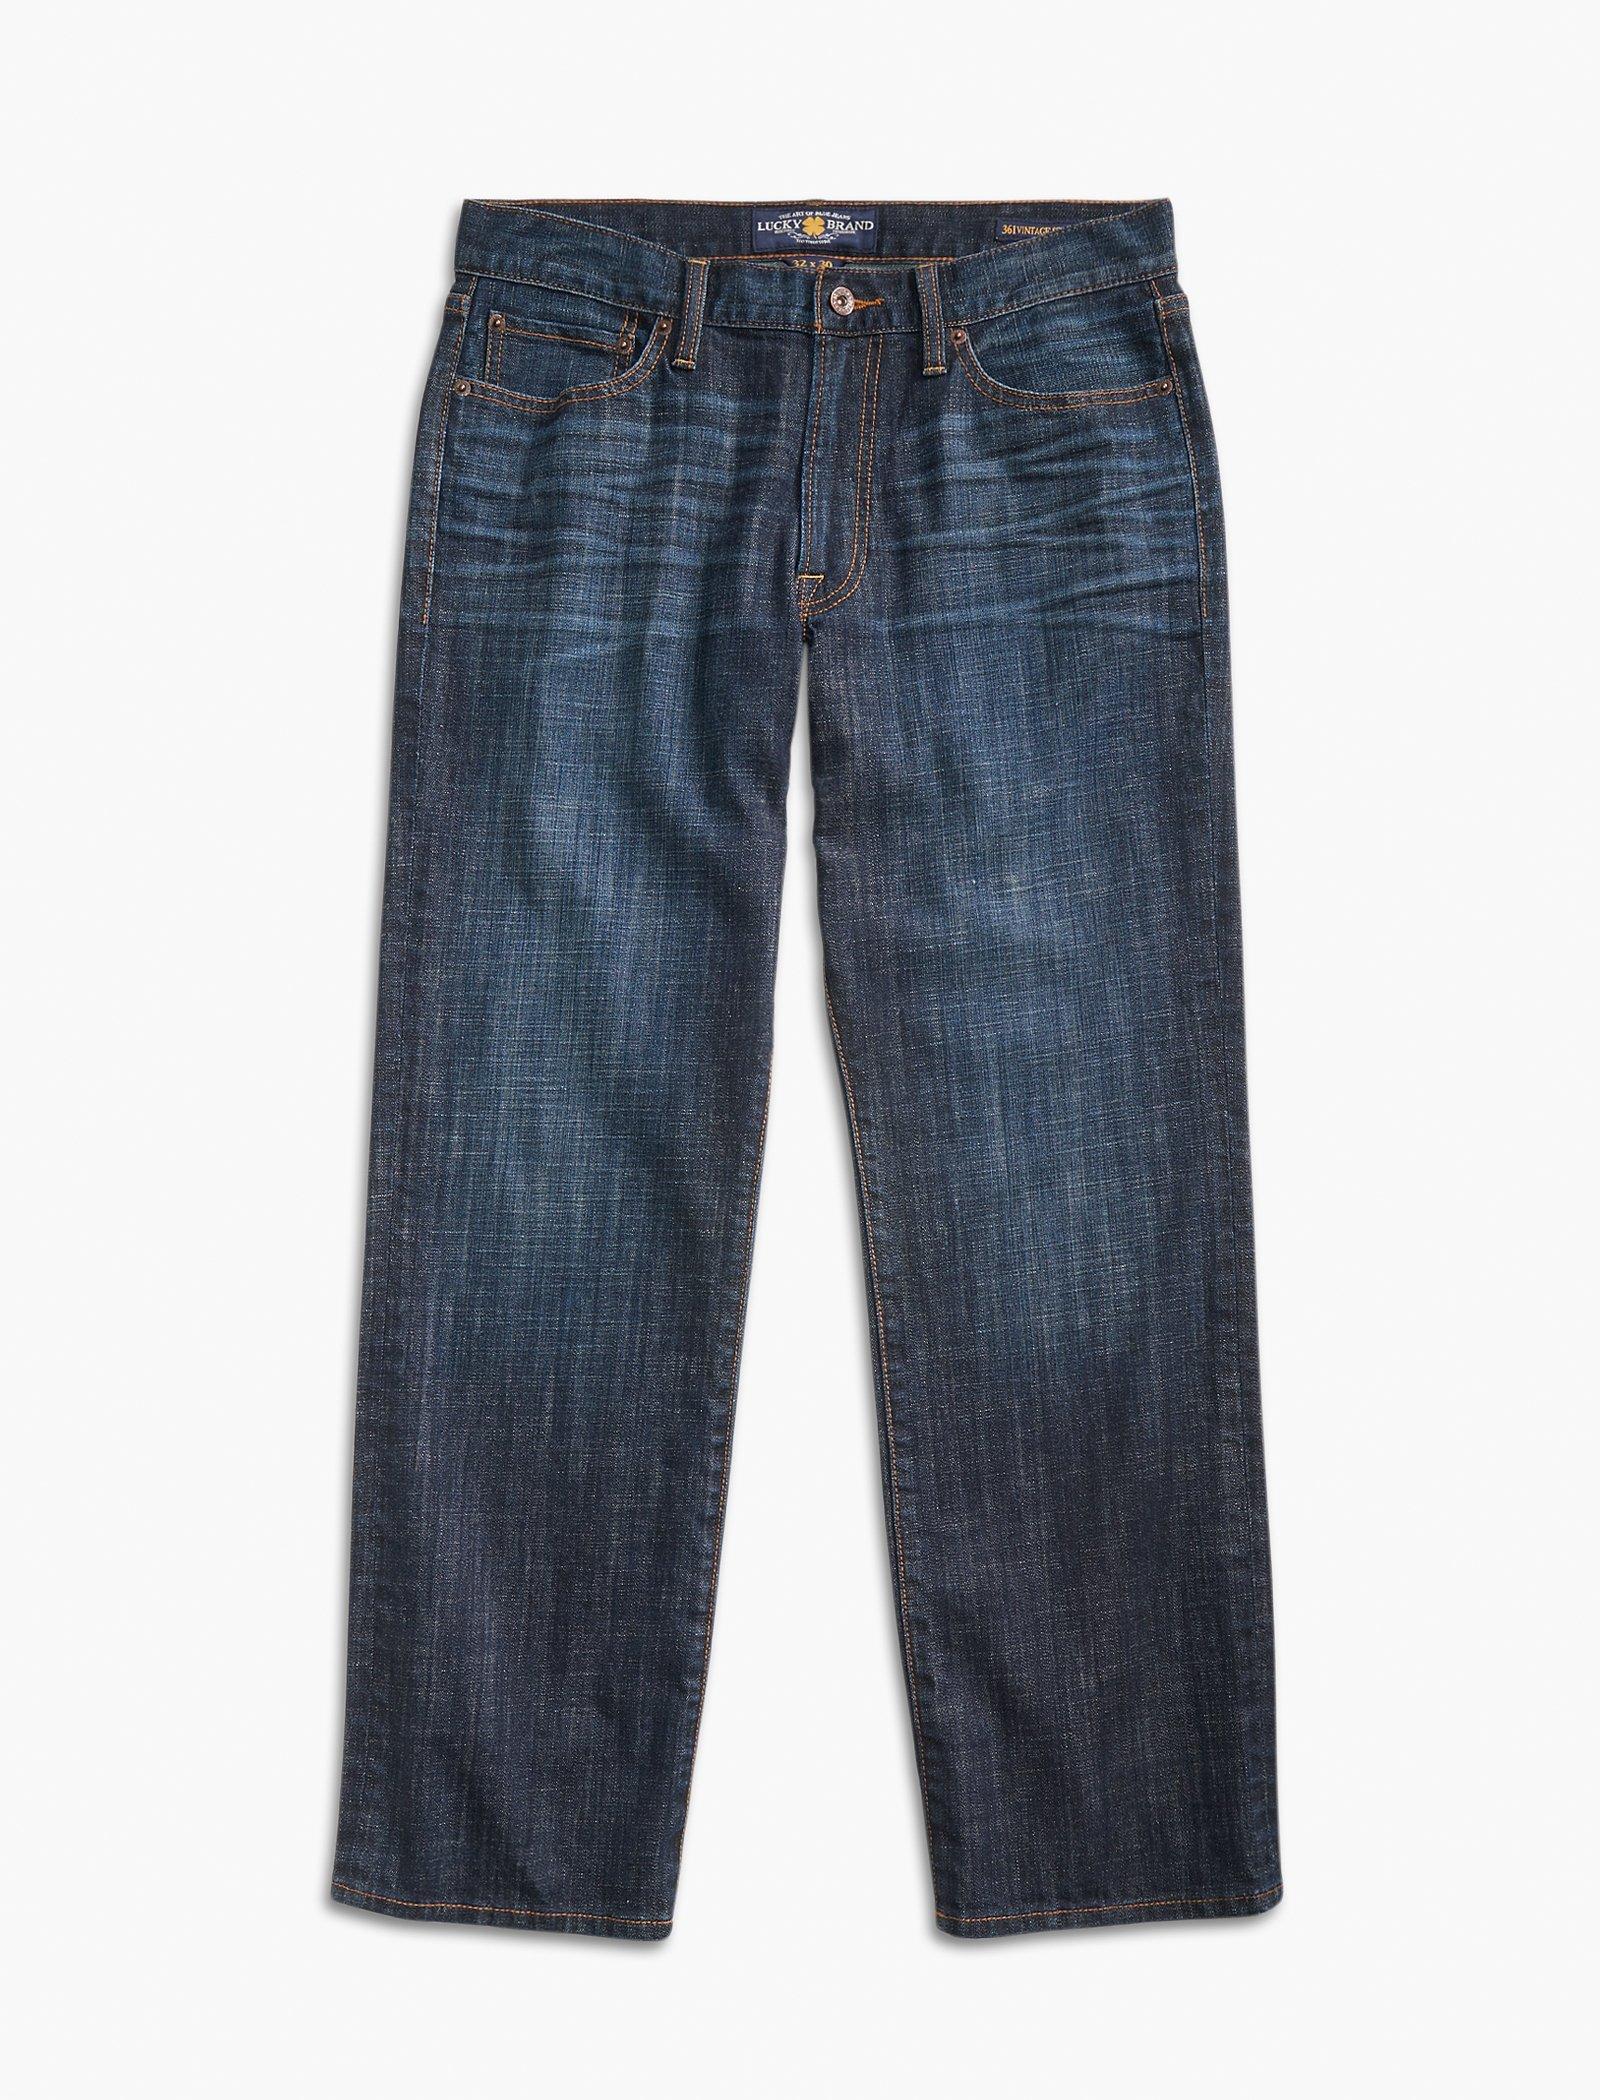 361 vintage straight lucky brand jeans